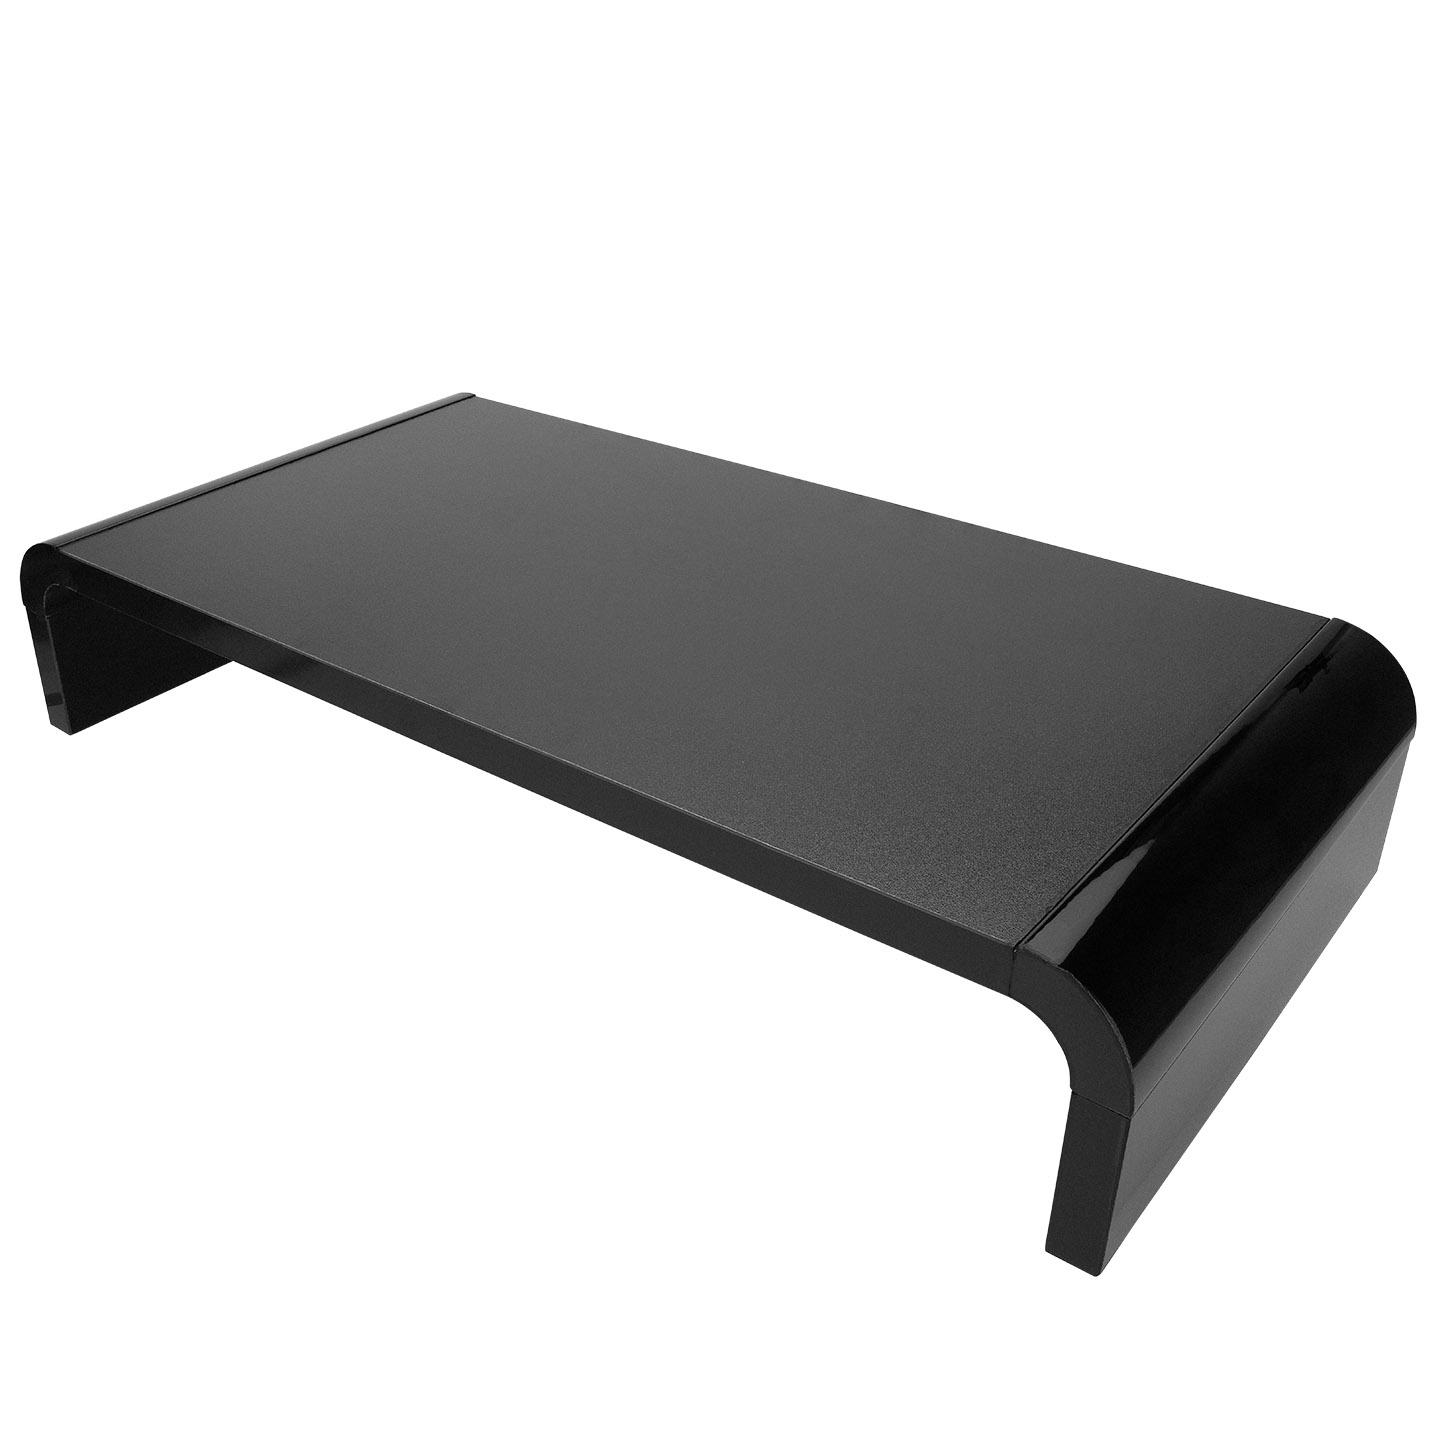 Everest MS-E01 55 * 26 * 10,5cm Wooden Monitor Stand